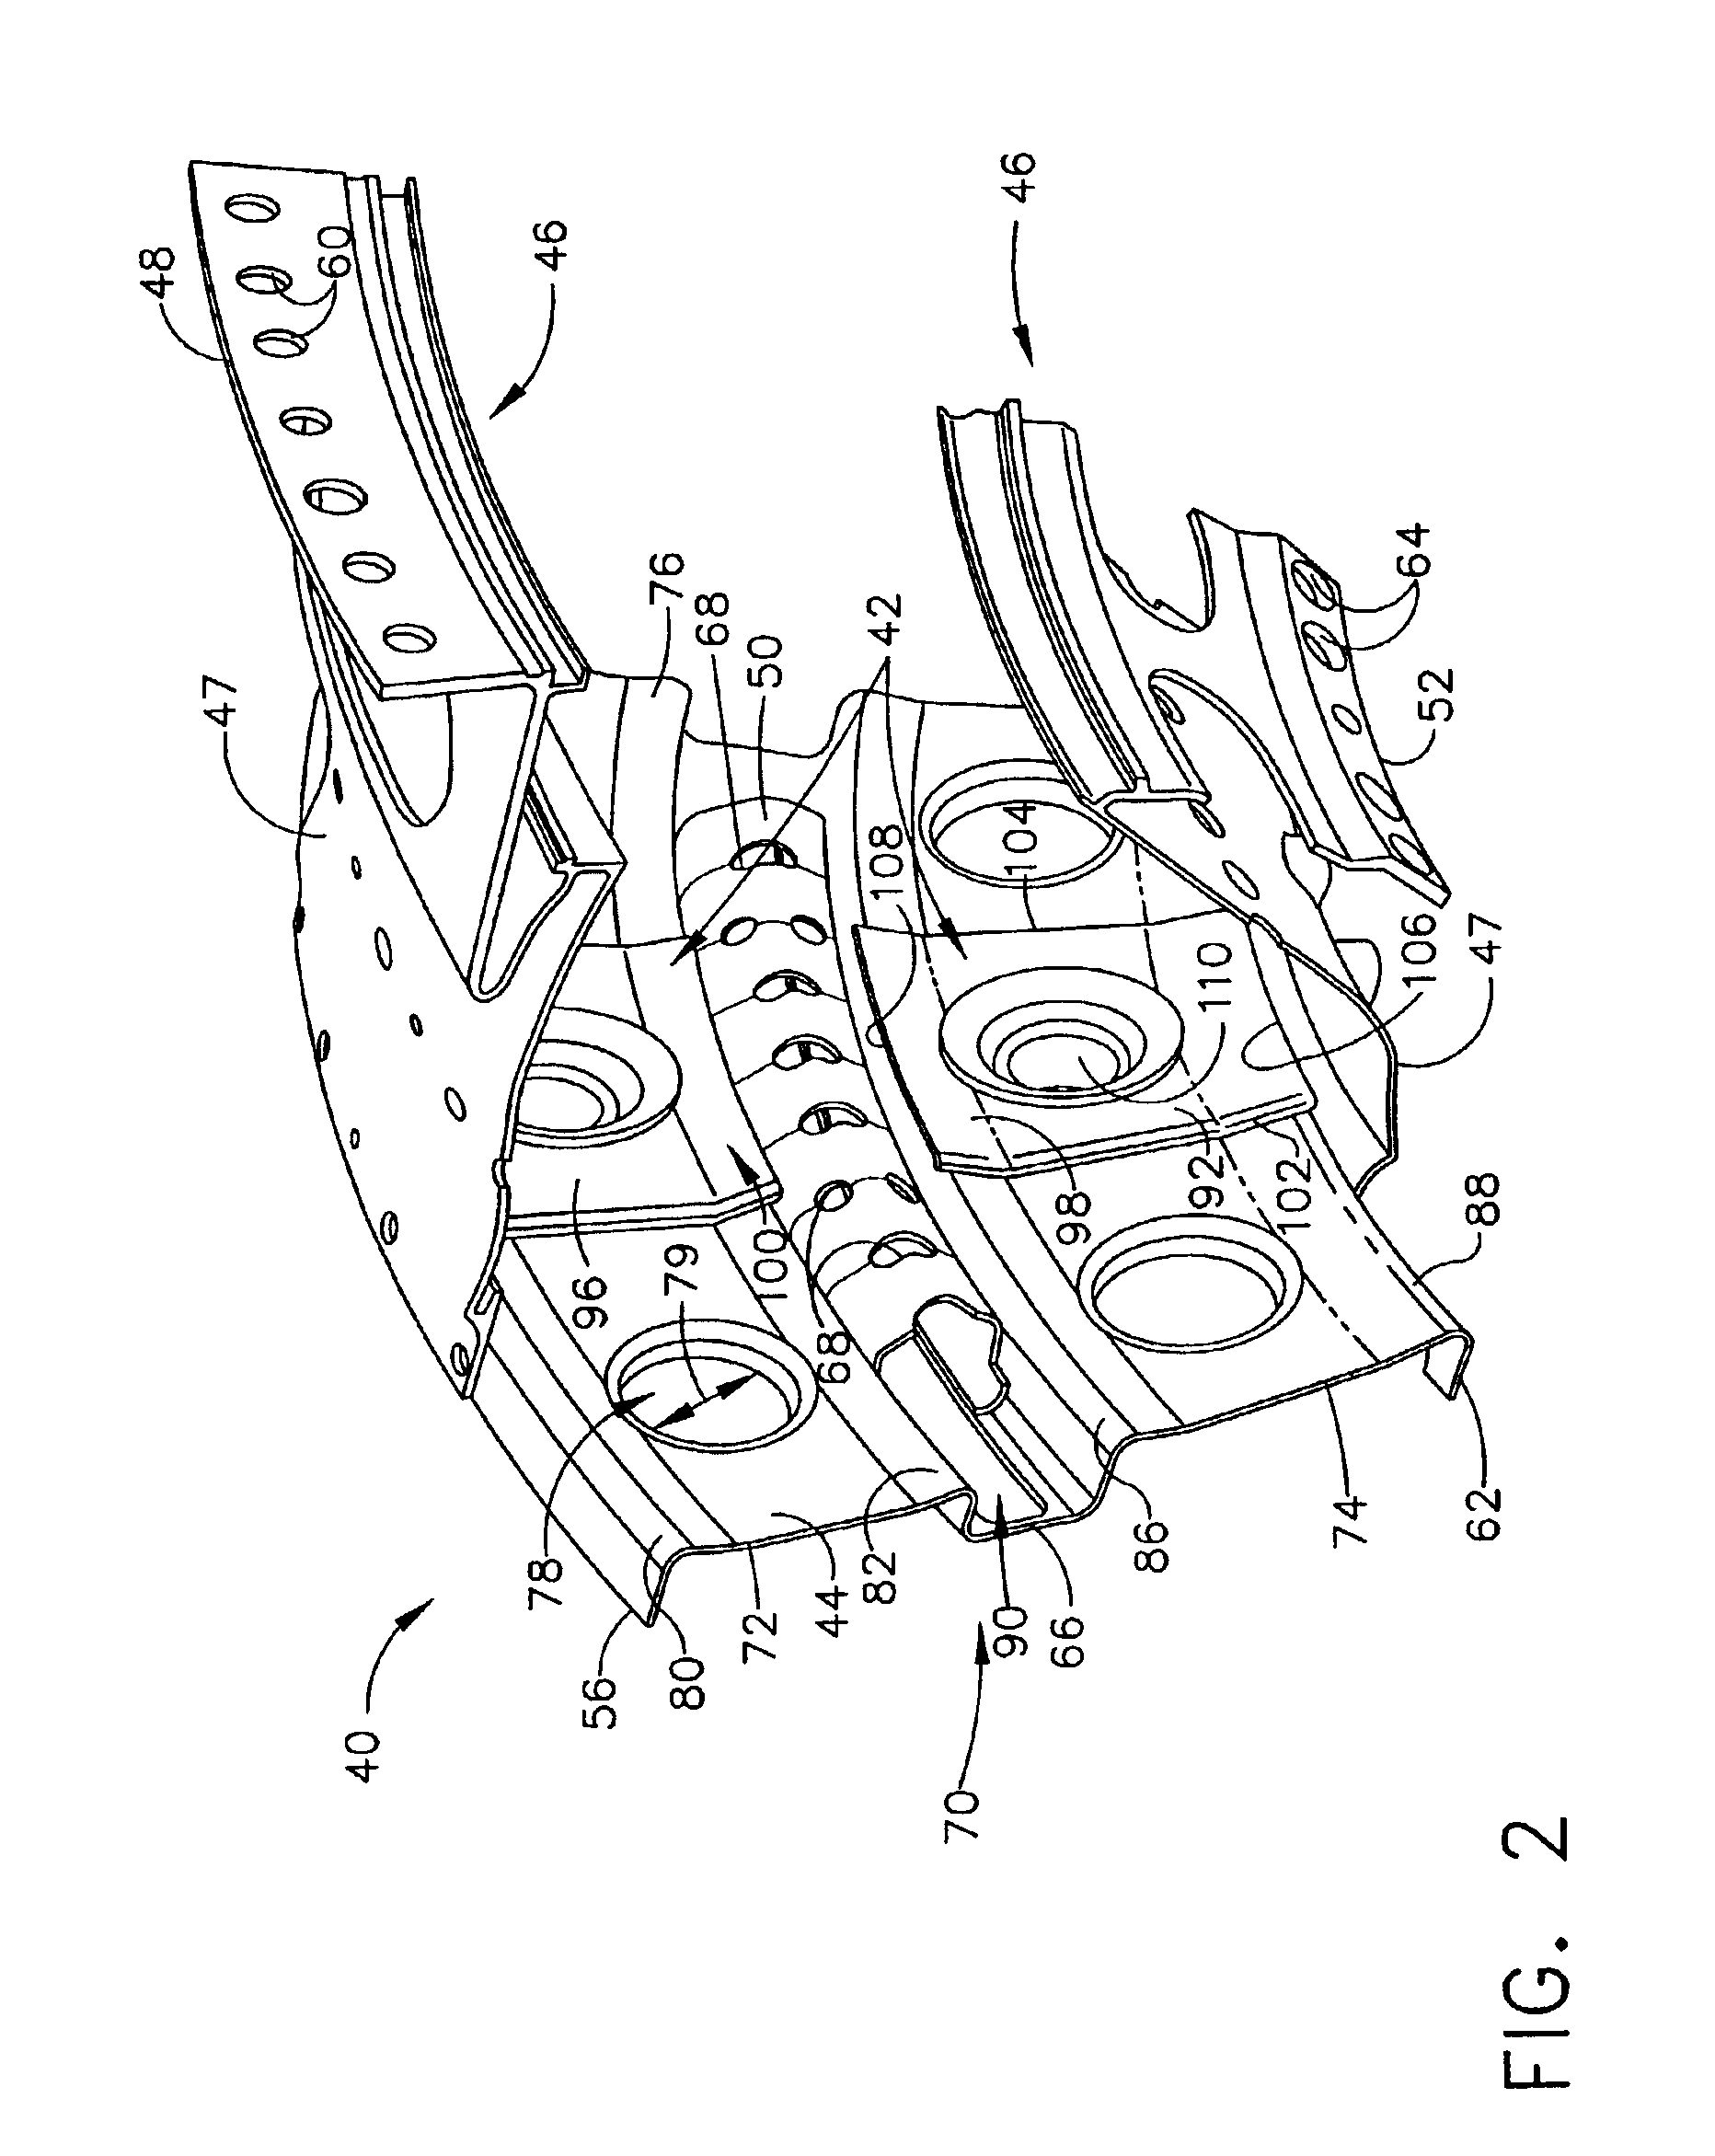 Method for increasing heat transfer from combustors